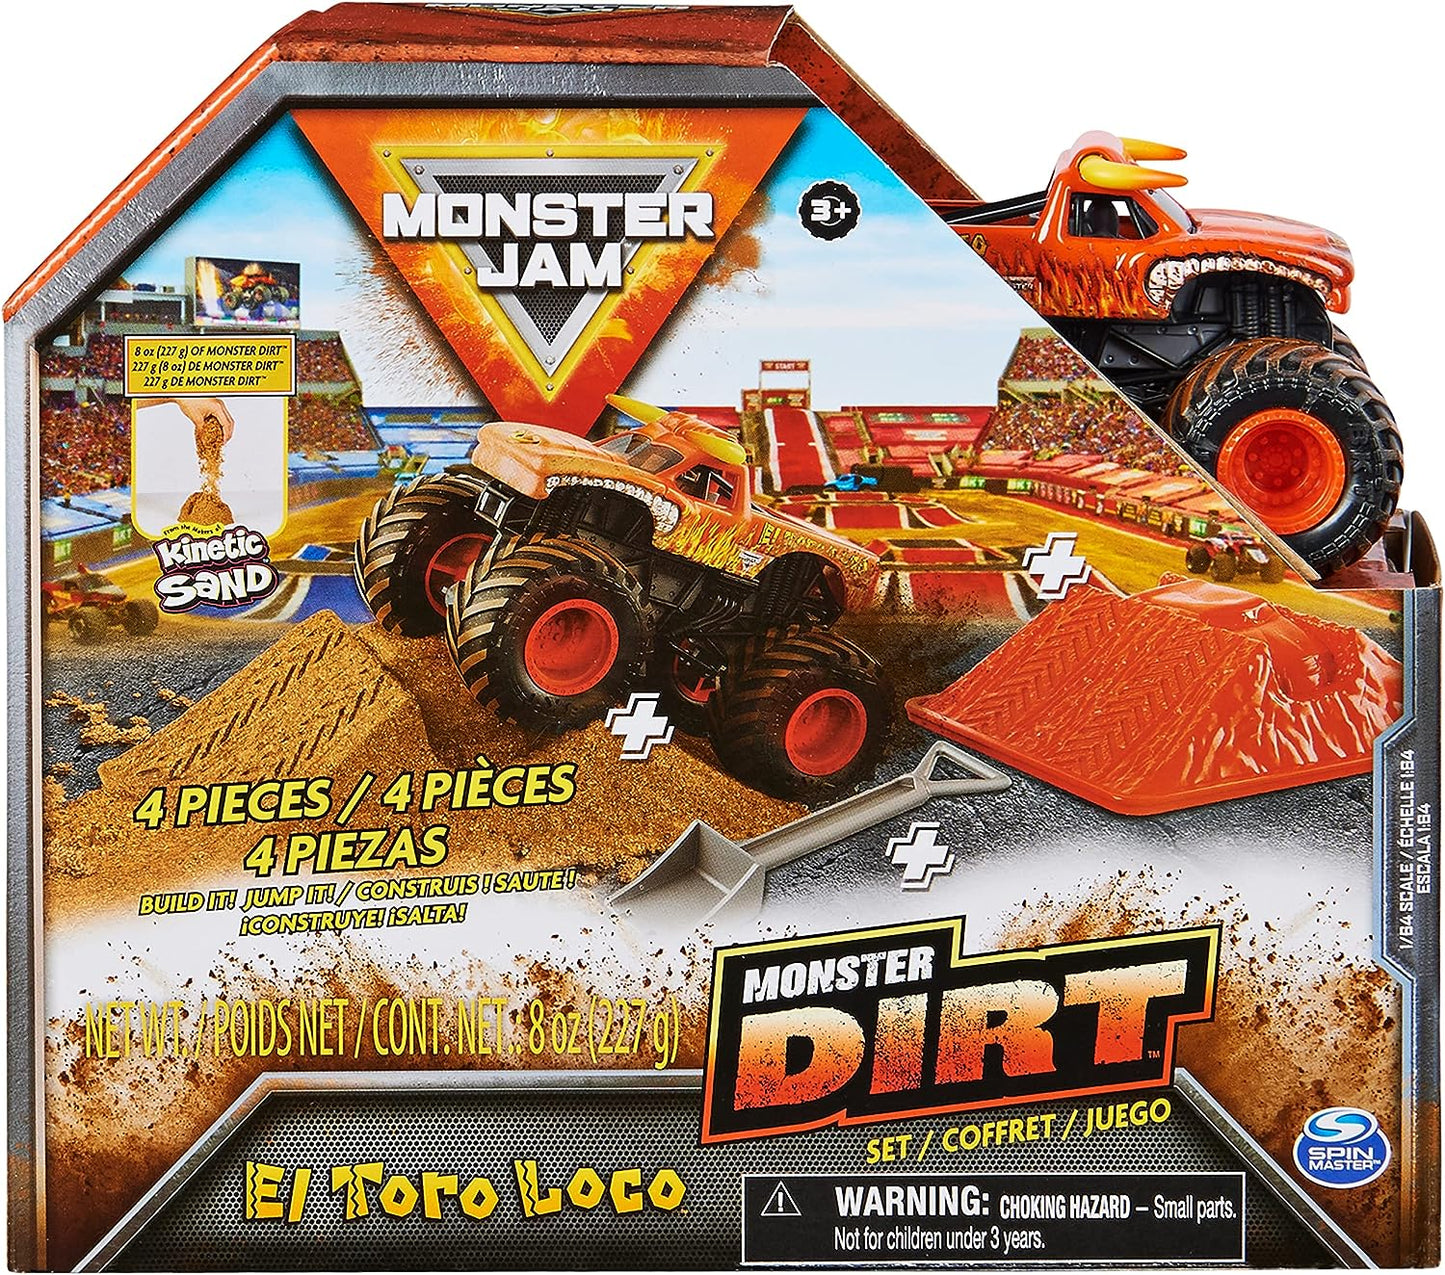 Monster Jam, El Toro Loco Monster Dirt 8oz Starter Set and Official 1:64 Scale Die-Cast Monster Truck, Kids Toys for Boys Ages 3 and up